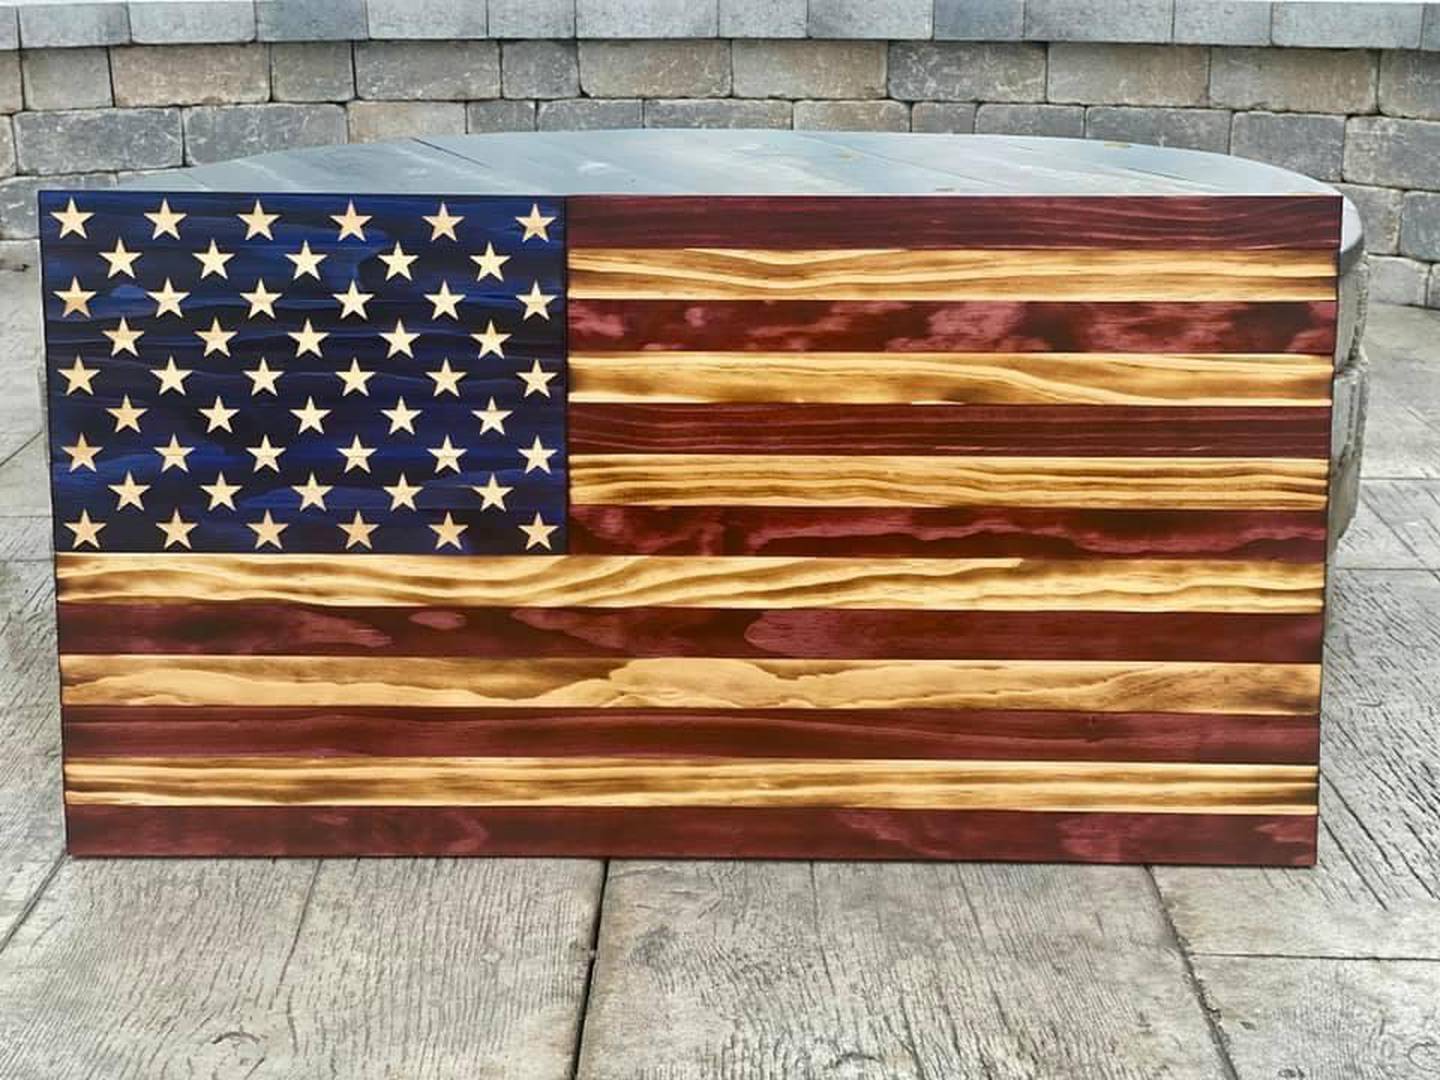 Woodstock North will hold a raffle for this wooden burned/stained American flag.